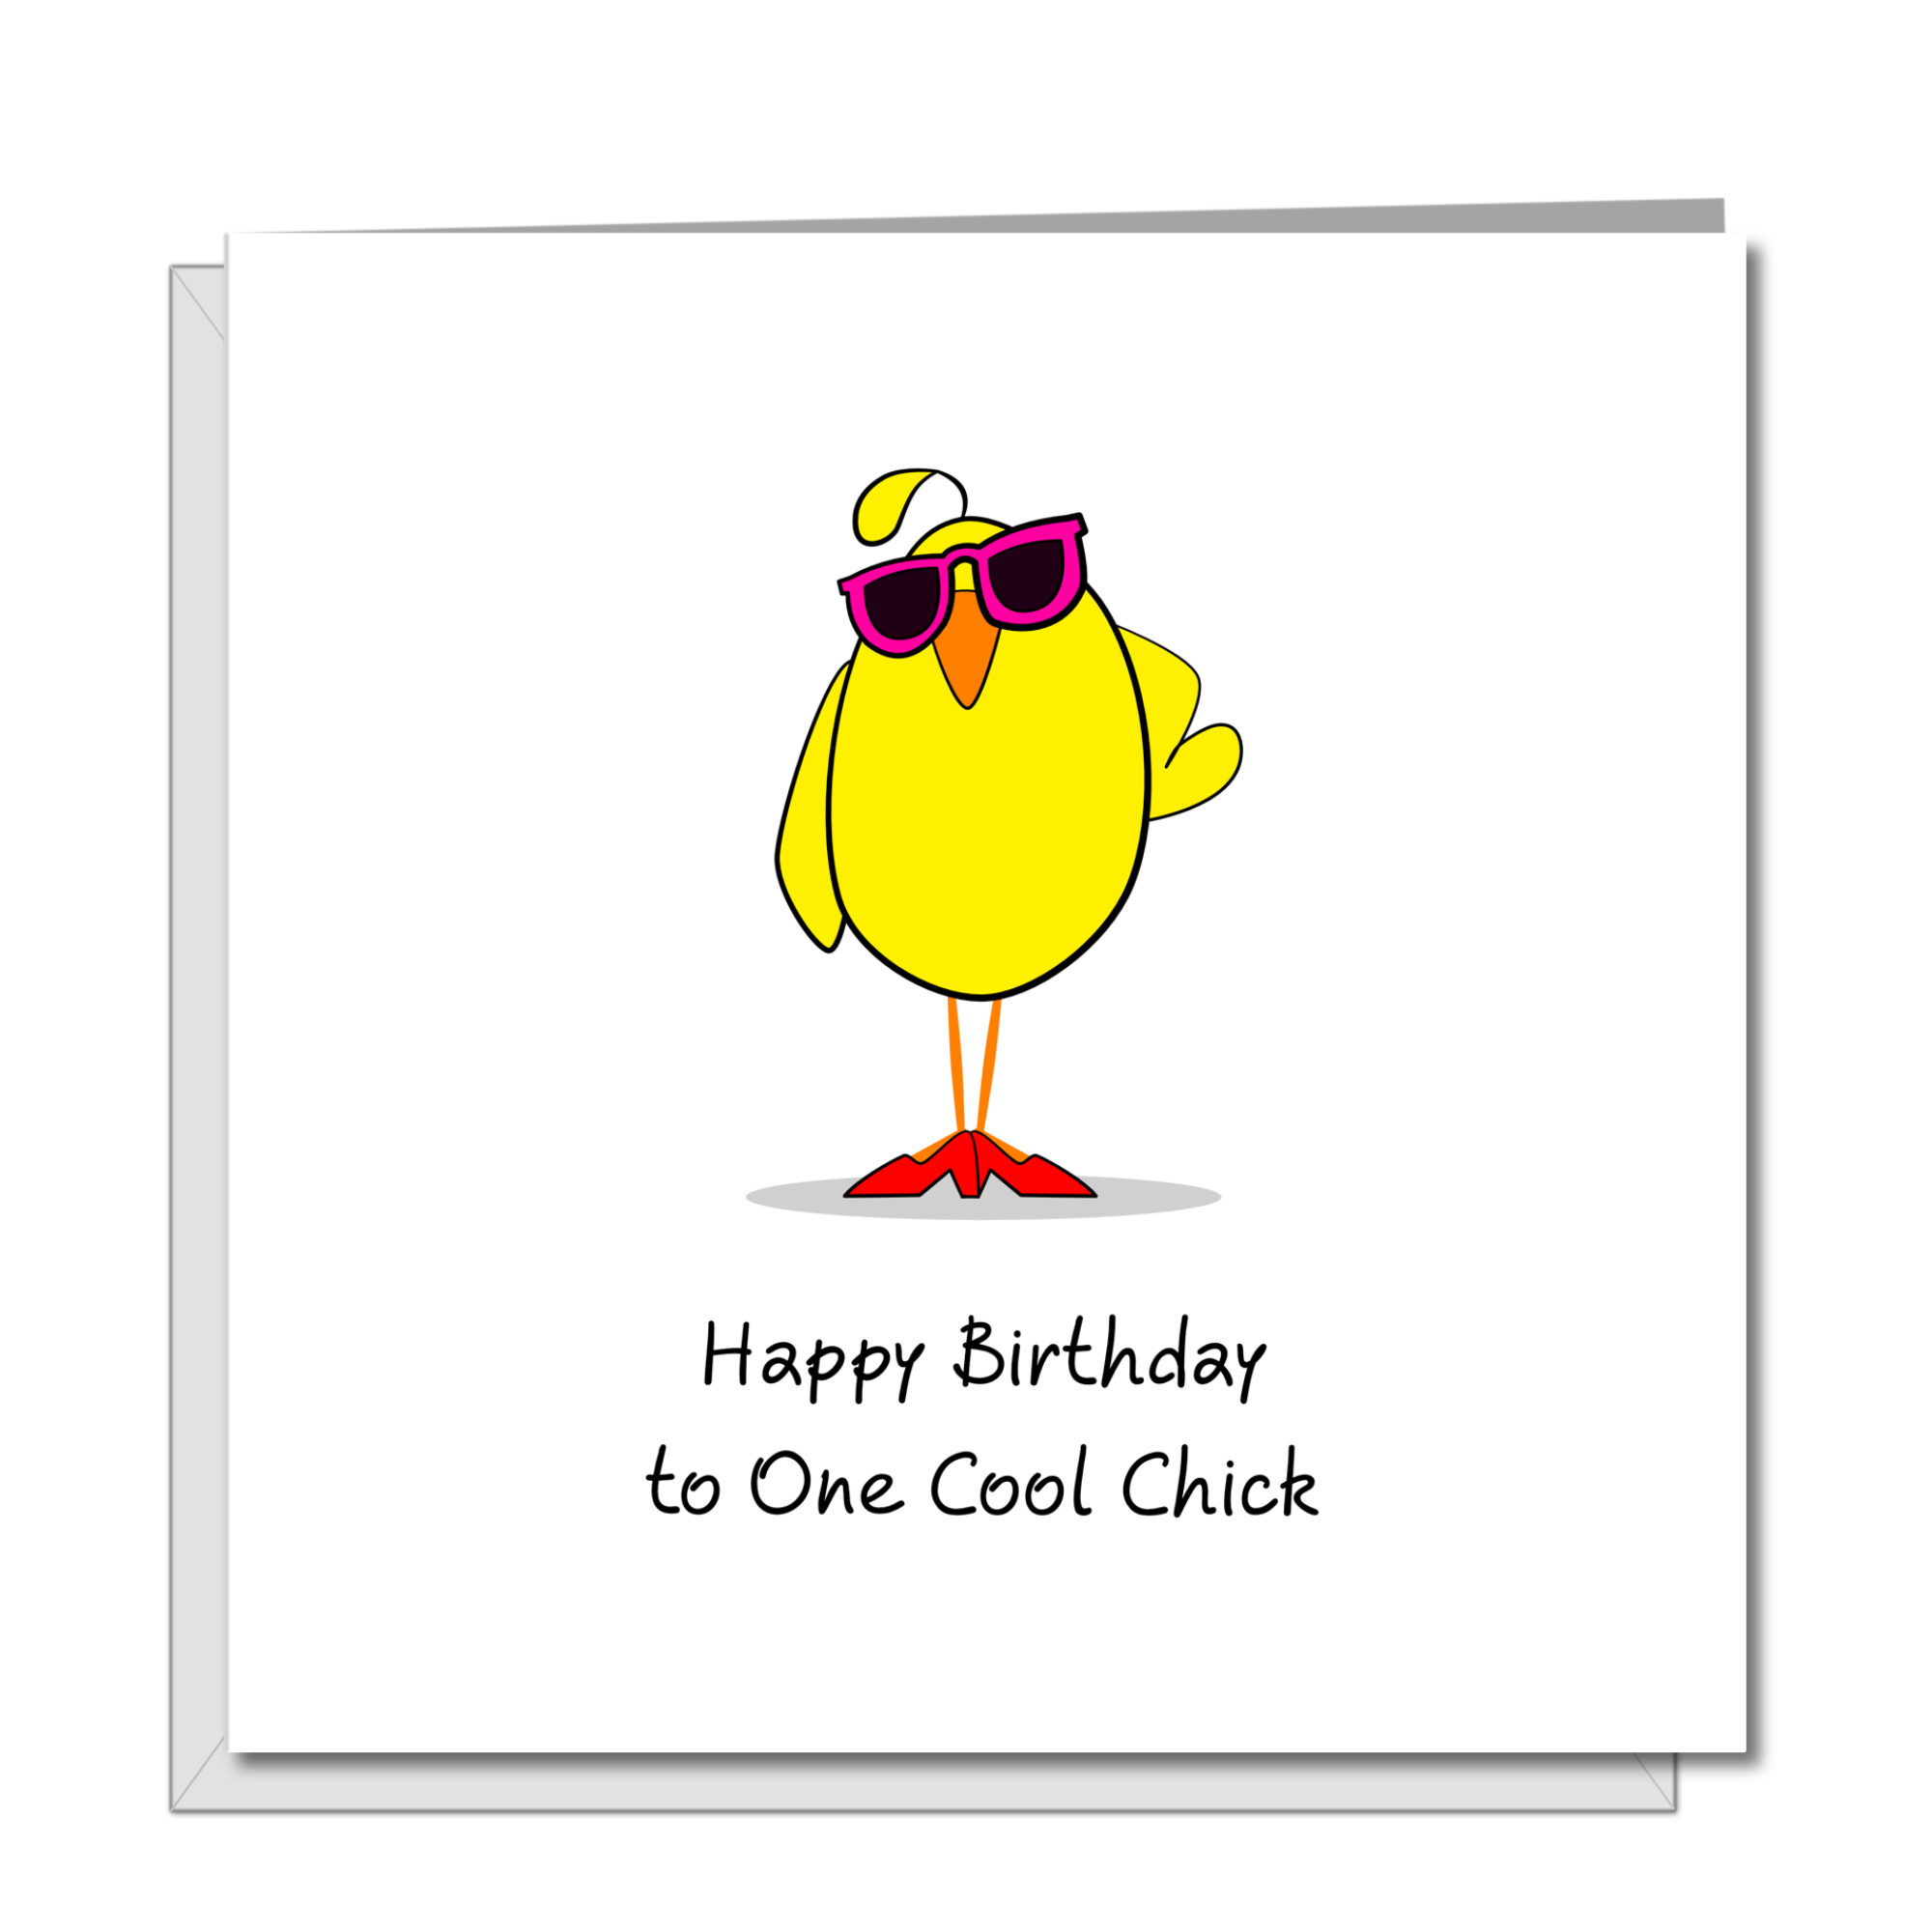 Cool Chick Girl friend Birthday Card, Girlfriend, Mum Mom, Best Friend Daughter, Special Friend Card BFF Card Funny Humorous Card